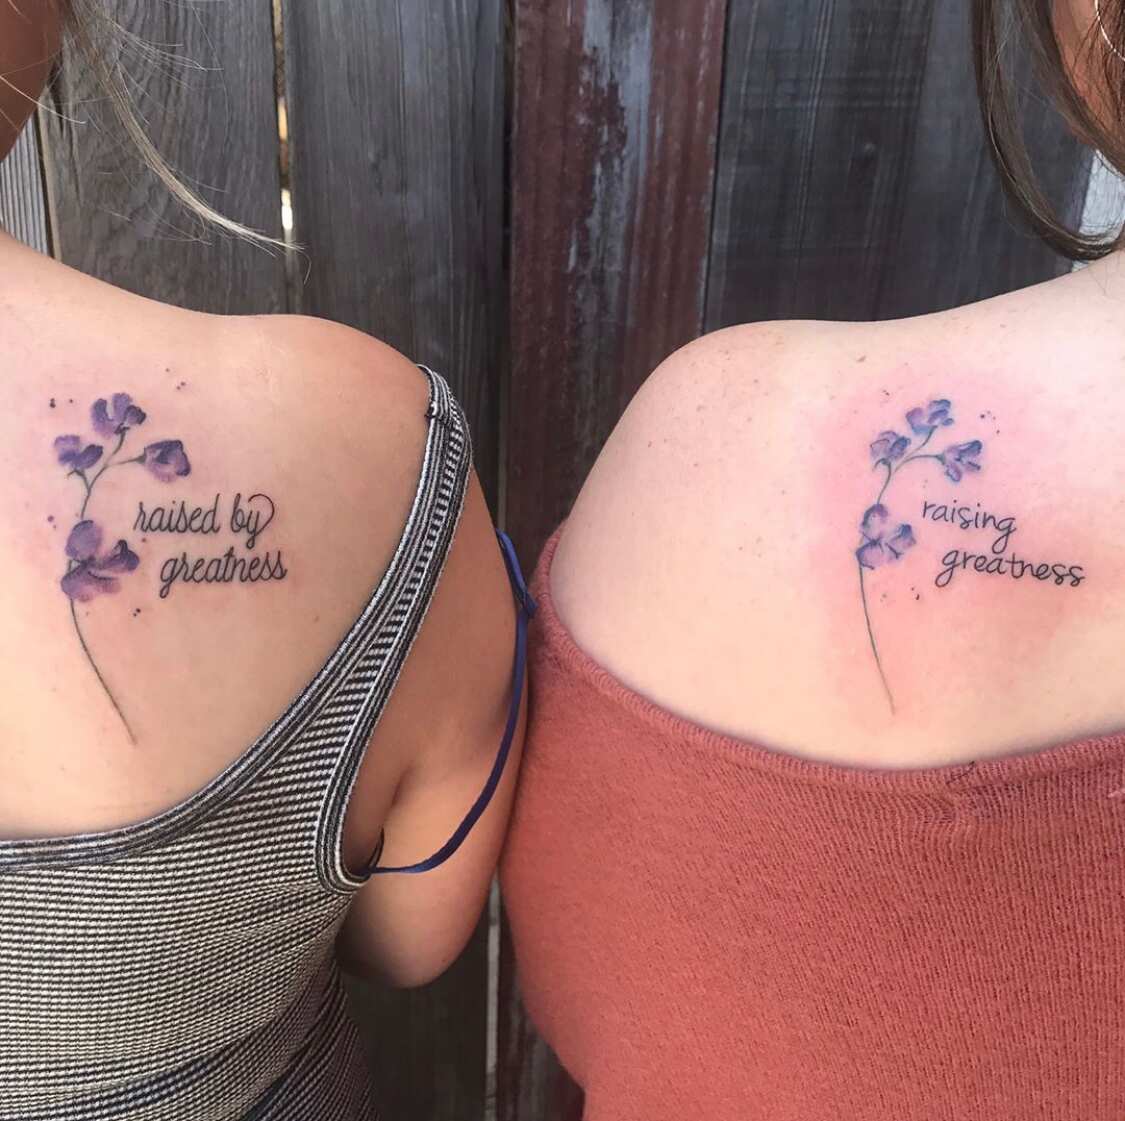 Cute Mother Daughter Affectionate Tattoos - Mother Daughter Tattoos - Mother  Tattoos - MomCanvas